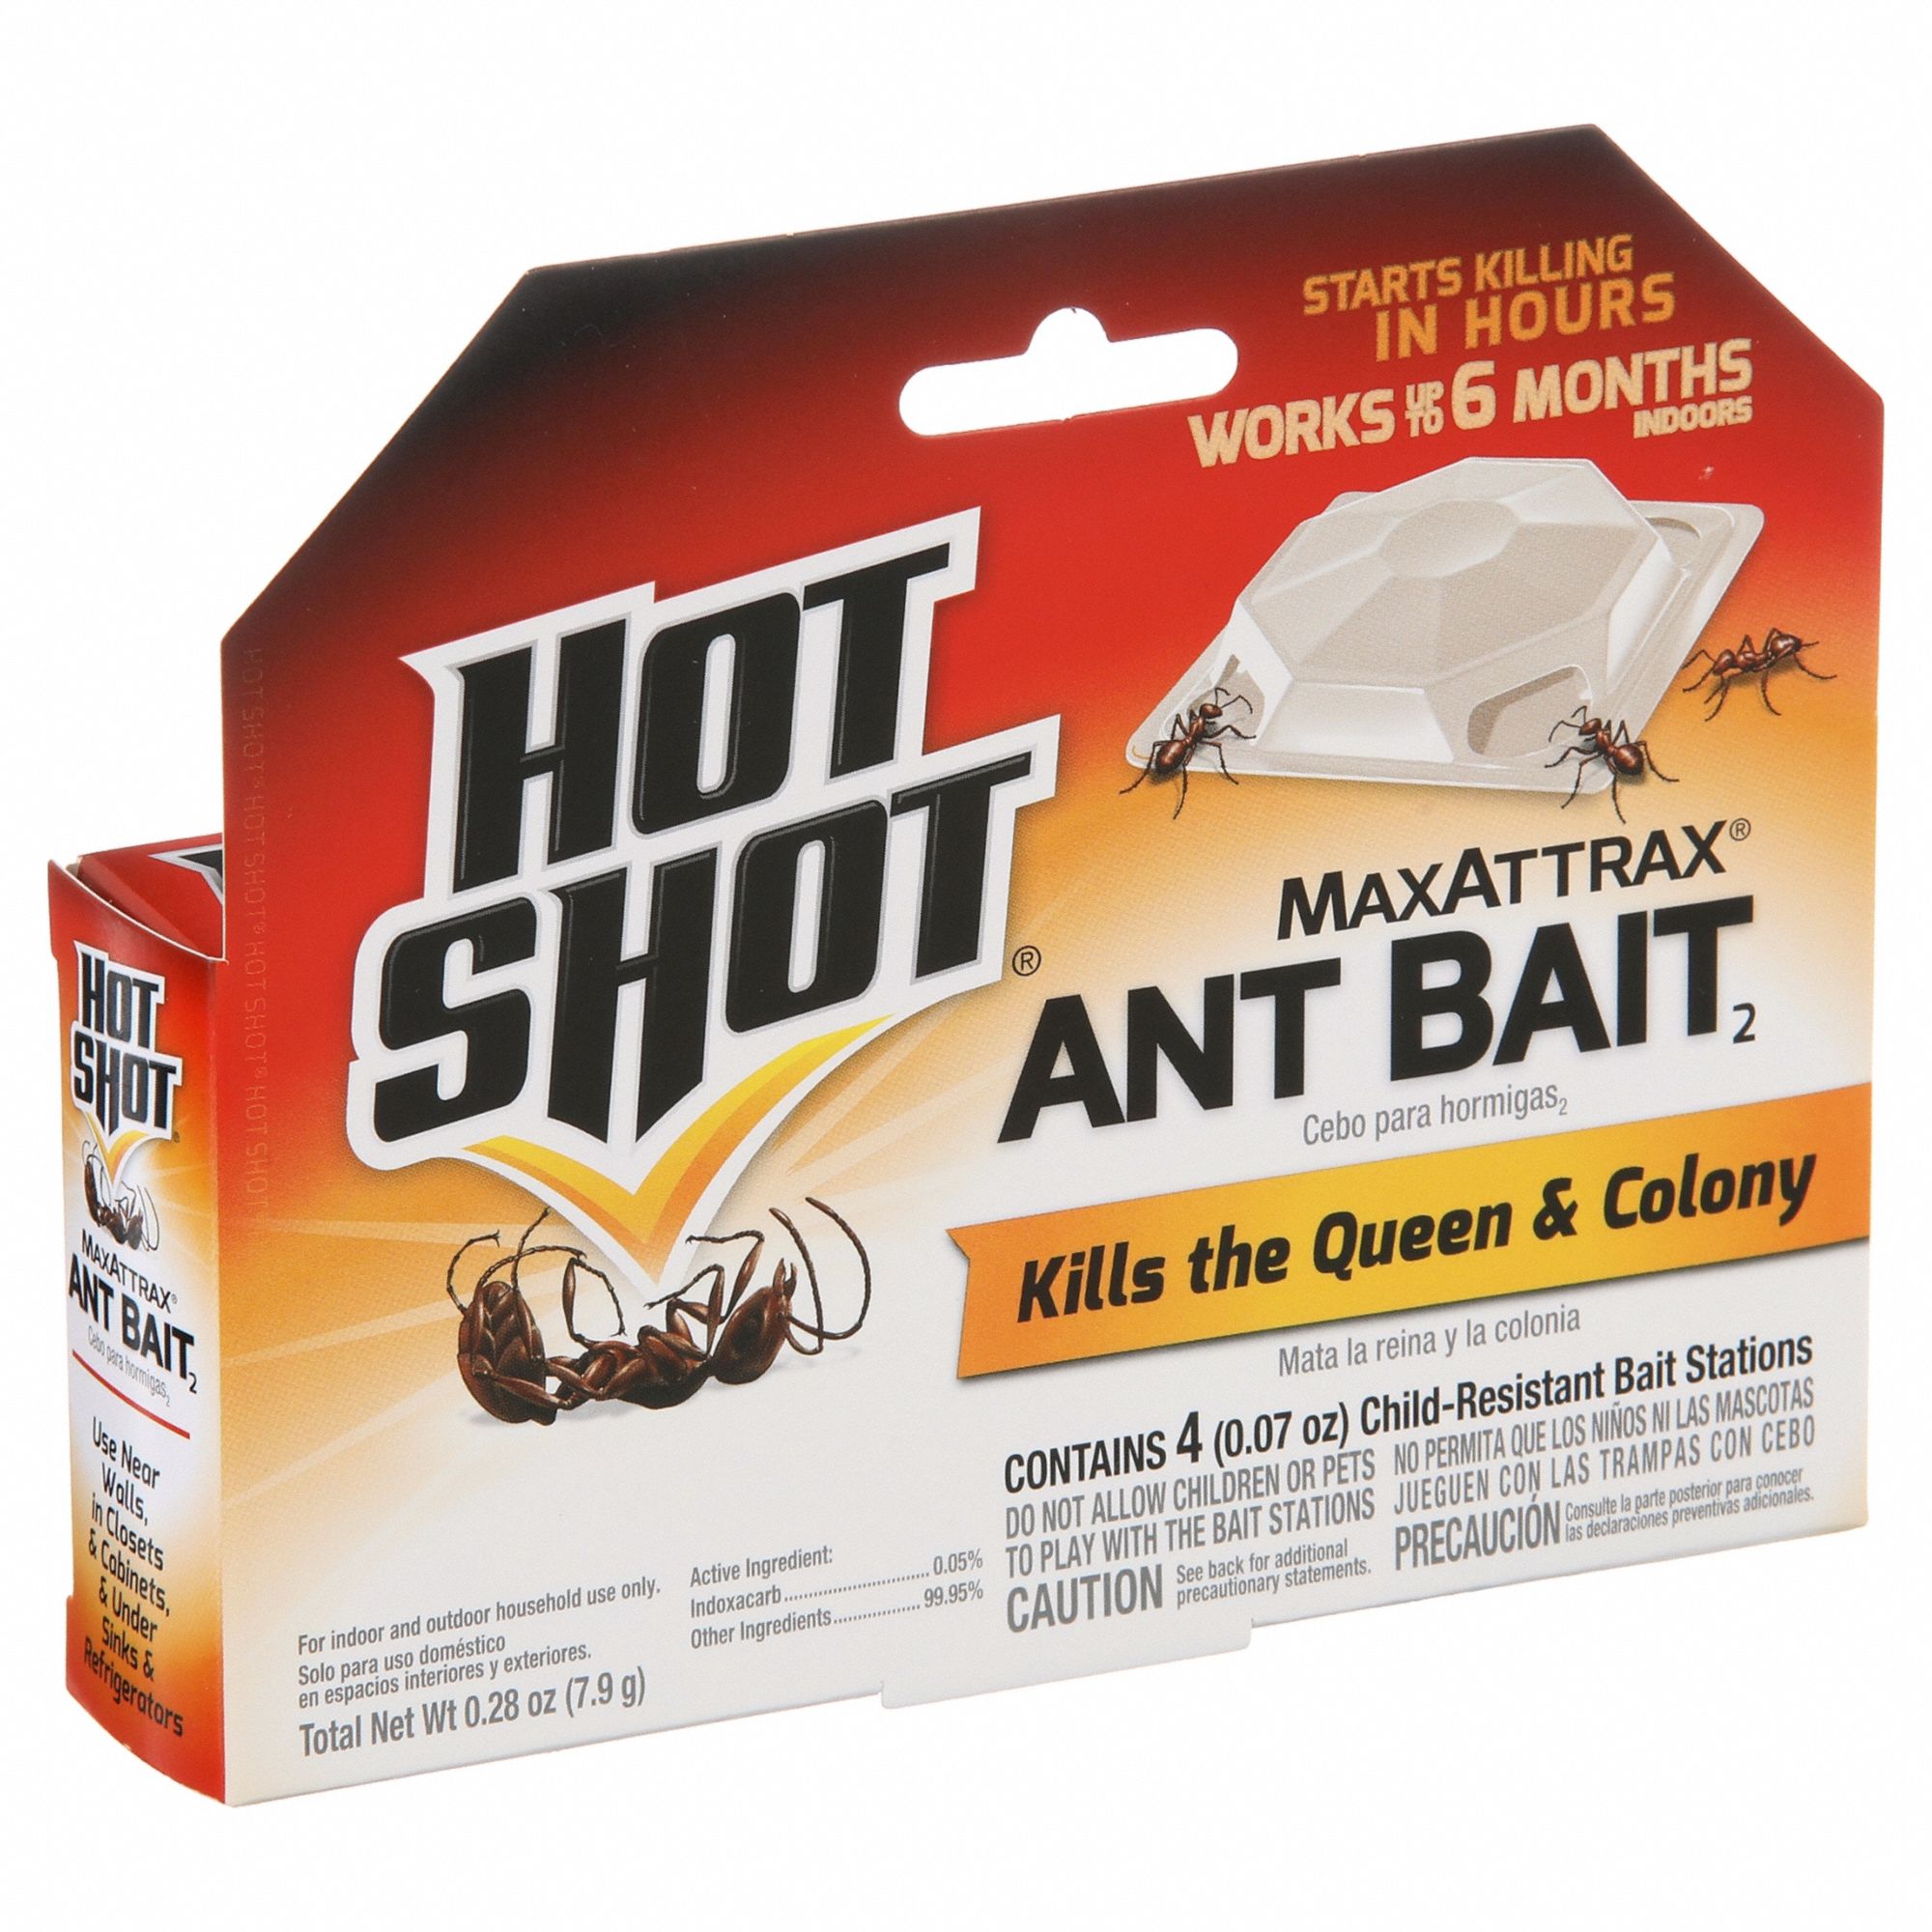 HOT SHOT, For Use On Crawling Insects, Bait Box Trap, Ant Killer -  36WG40